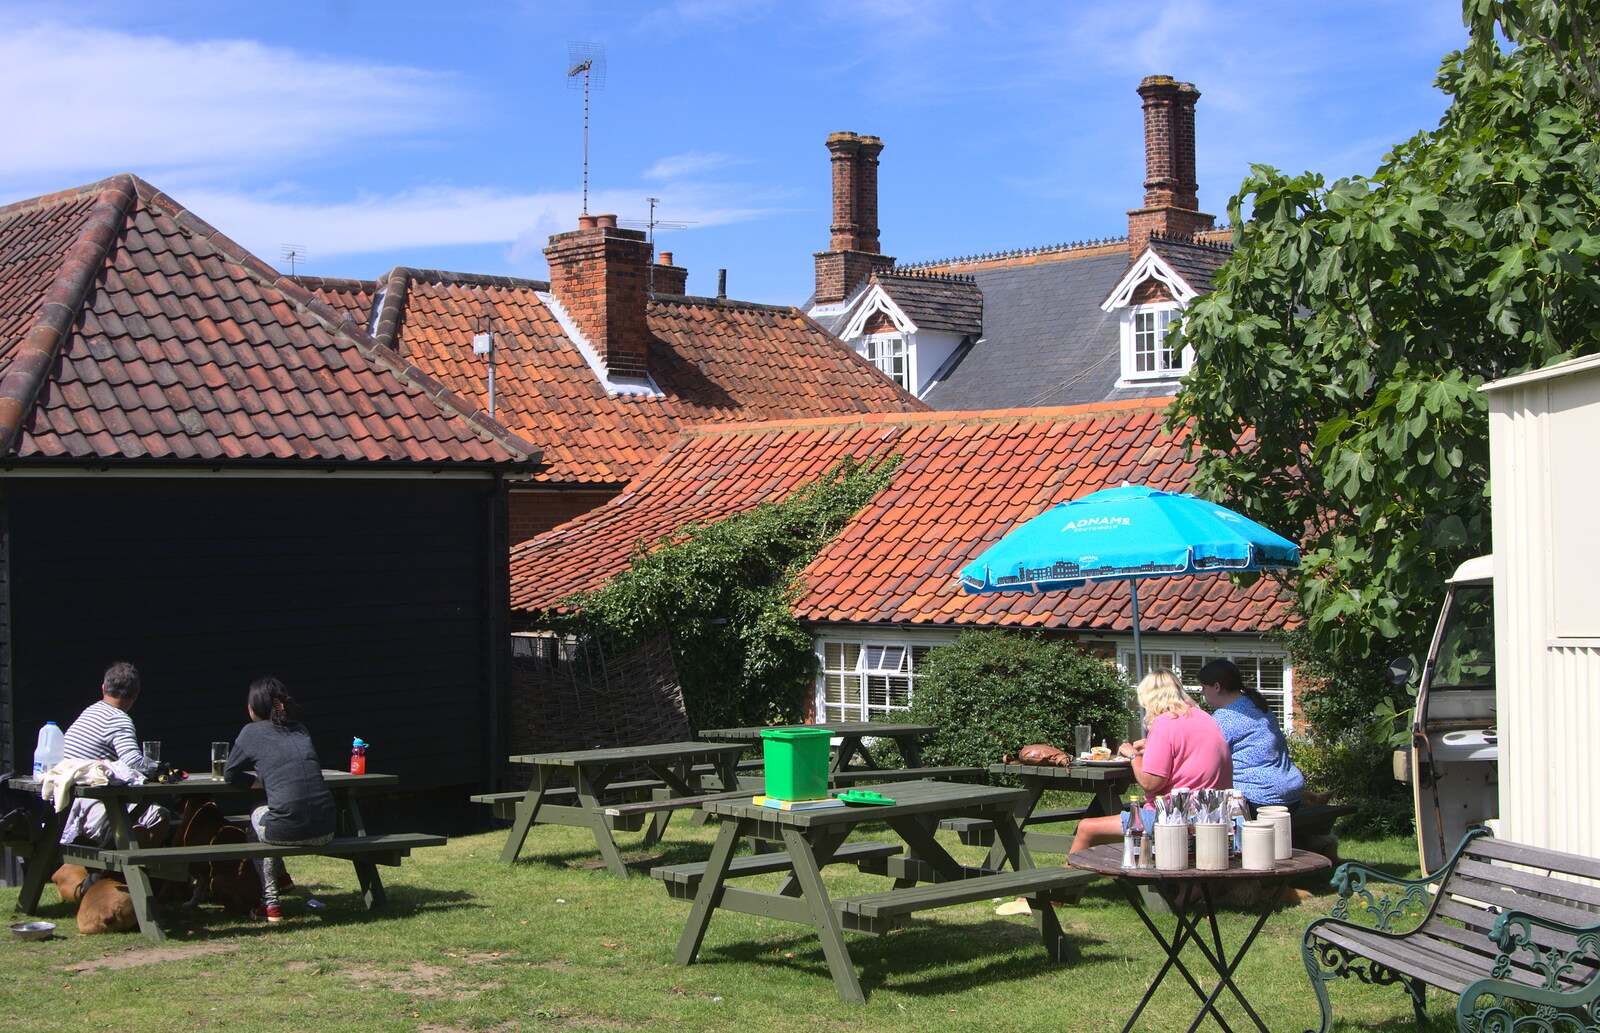 The beer garden of the Dunwich Ship from The Archaeology of Dunwich: A Camping Trip, Dunwich, Suffolk - 1st August 2015